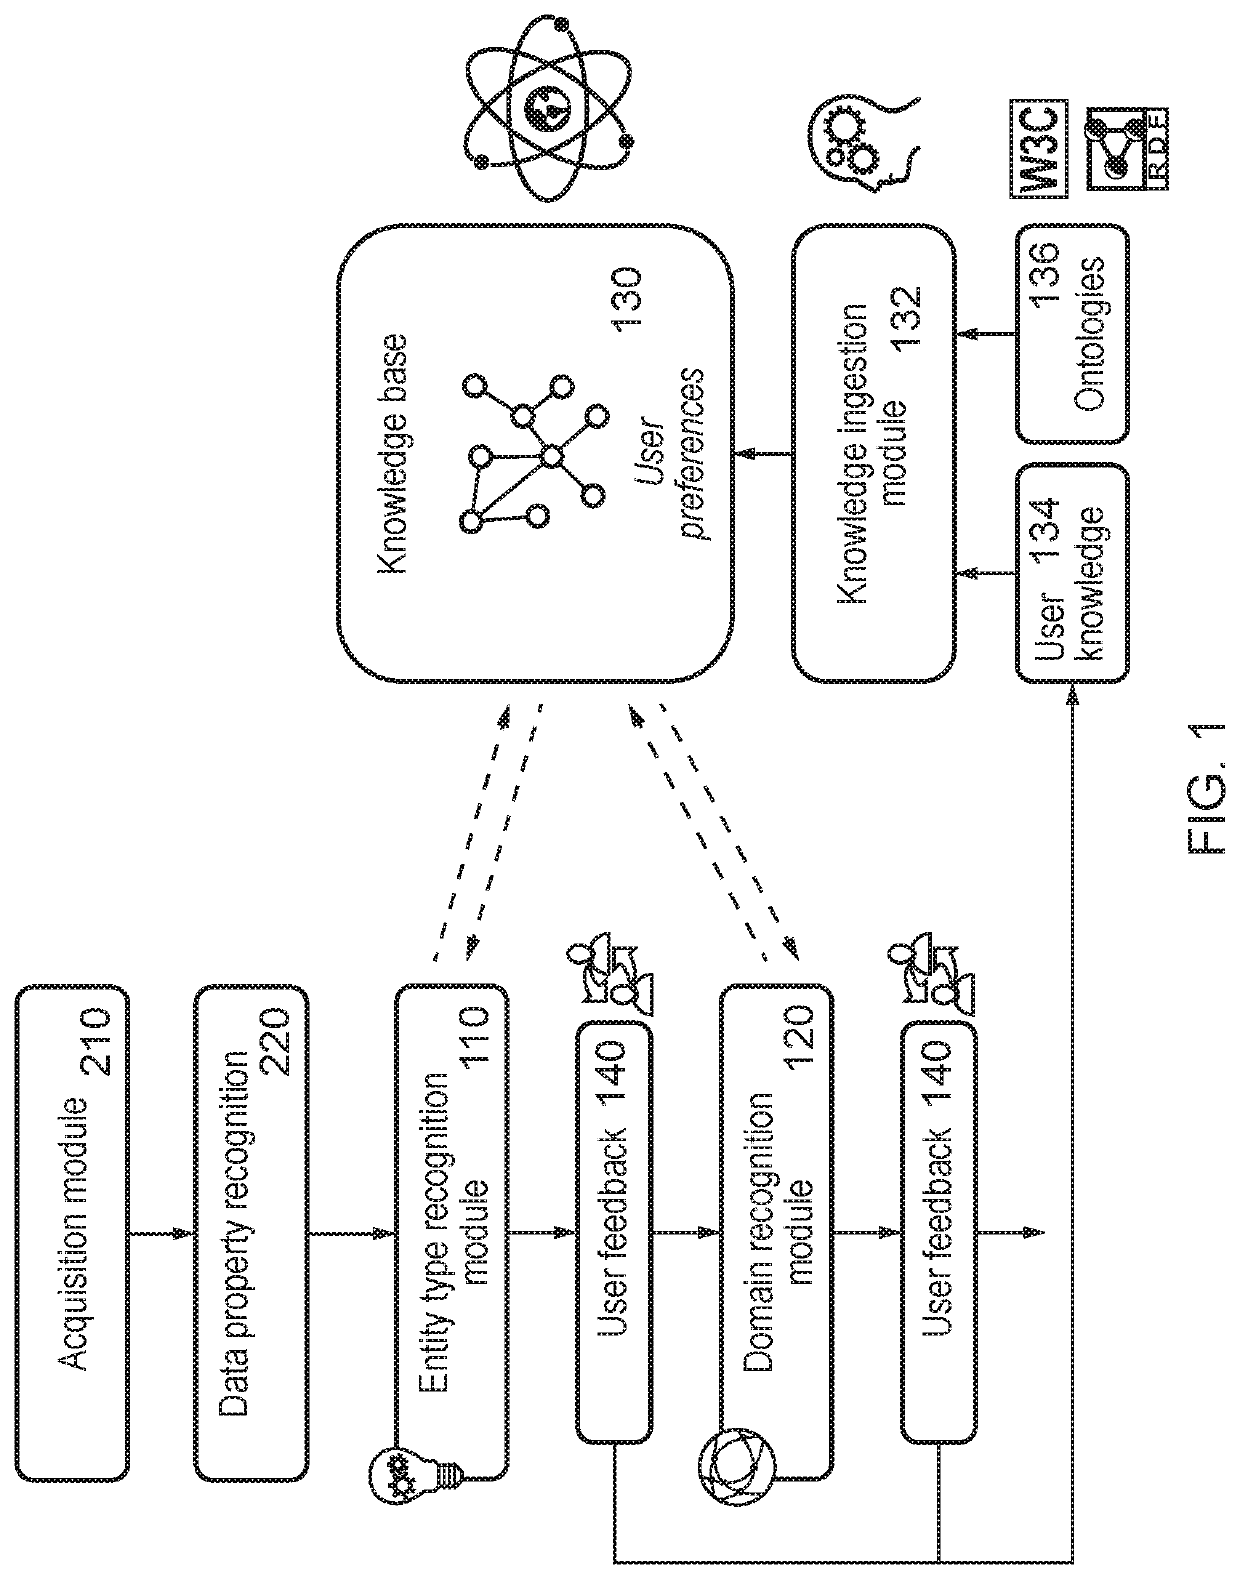 System, method, and program for reconciling input datasets with a model ontology